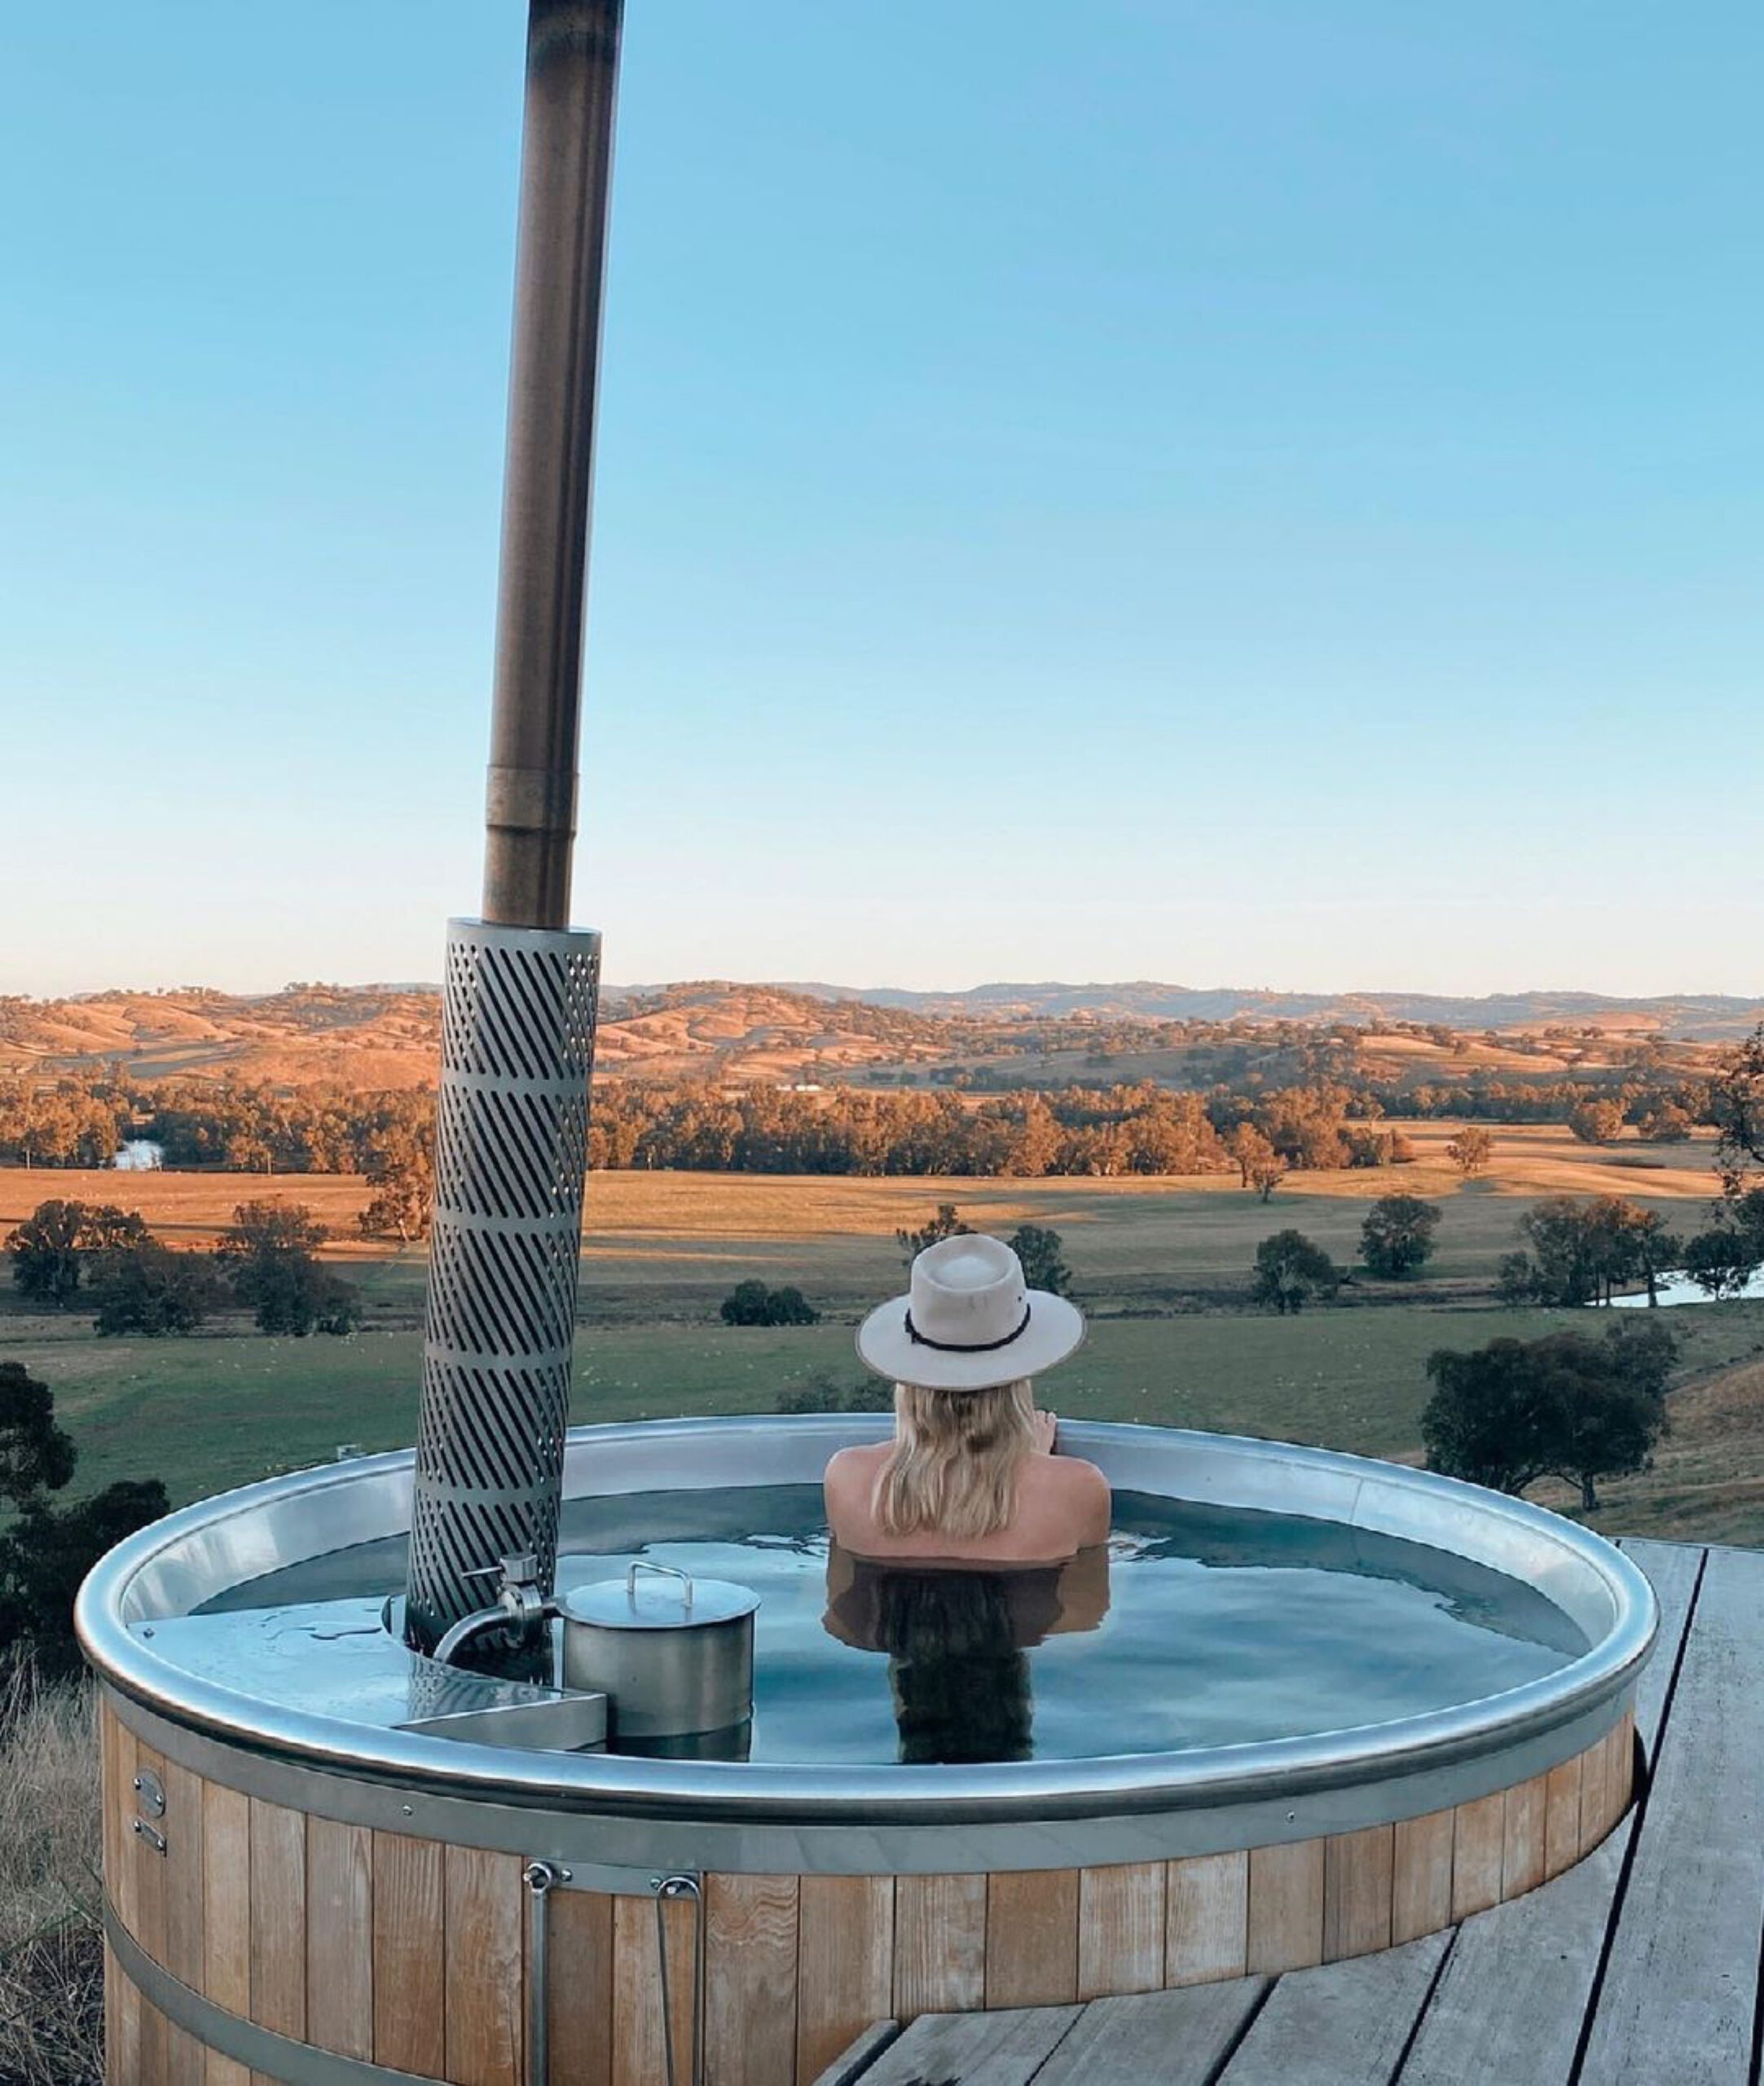 Soaking in the hot tub at the Kimo Estate huts. Best off grid accommodation in NSW